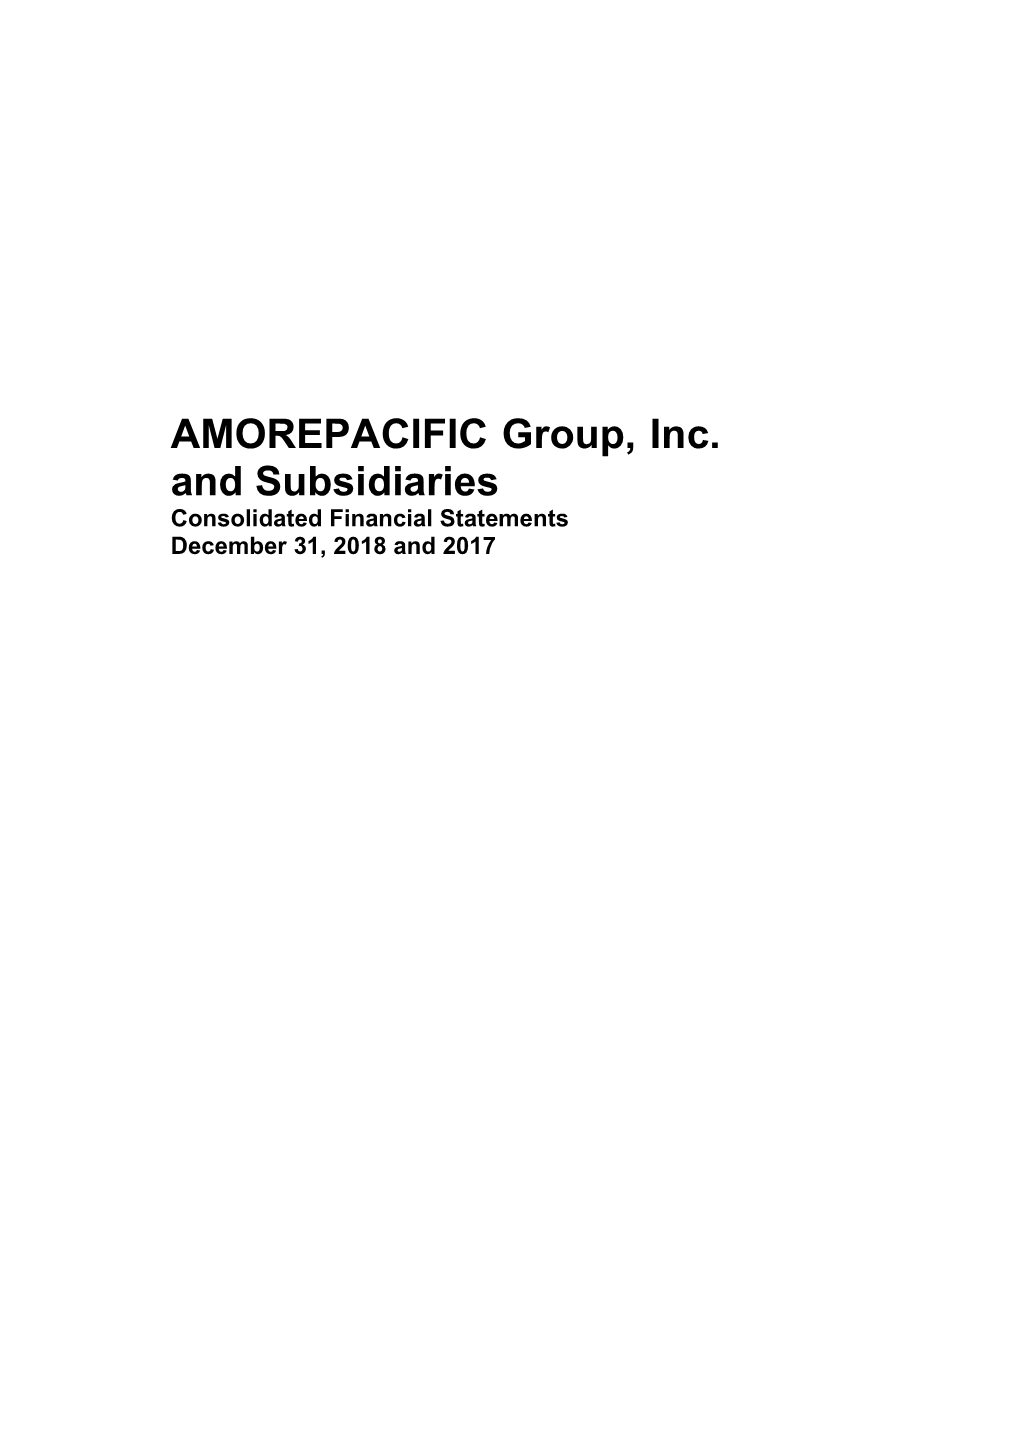 AMOREPACIFIC Group, Inc. and Subsidiaries Consolidated Financial Statements December 31, 2018 and 2017